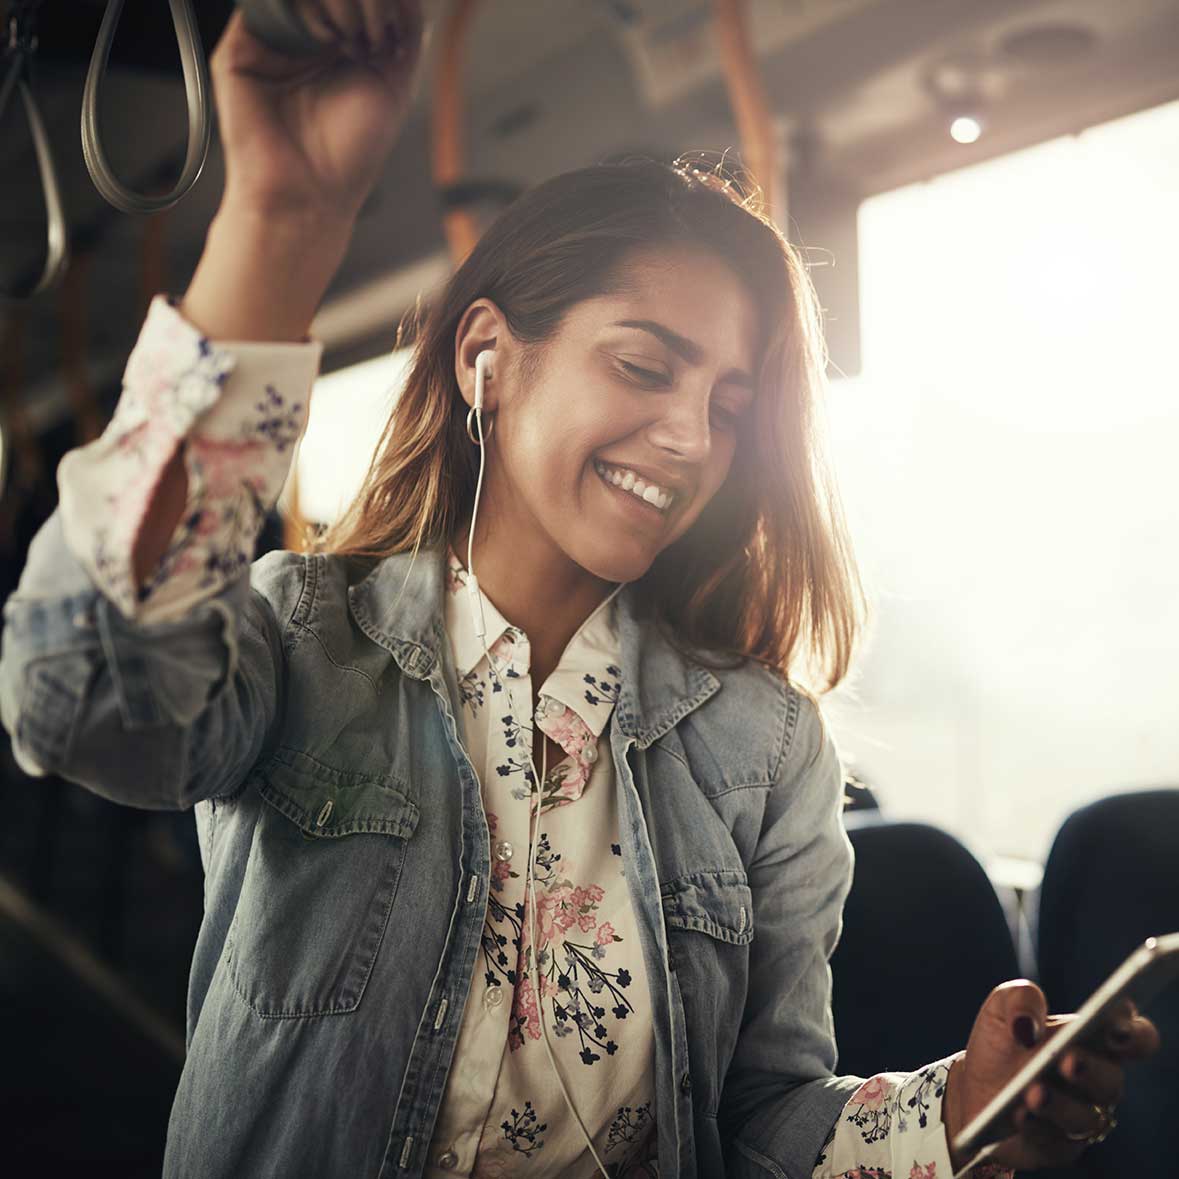 A lady holding a phone in one hand while grabbing a top handle with her other hand on a bus or train.